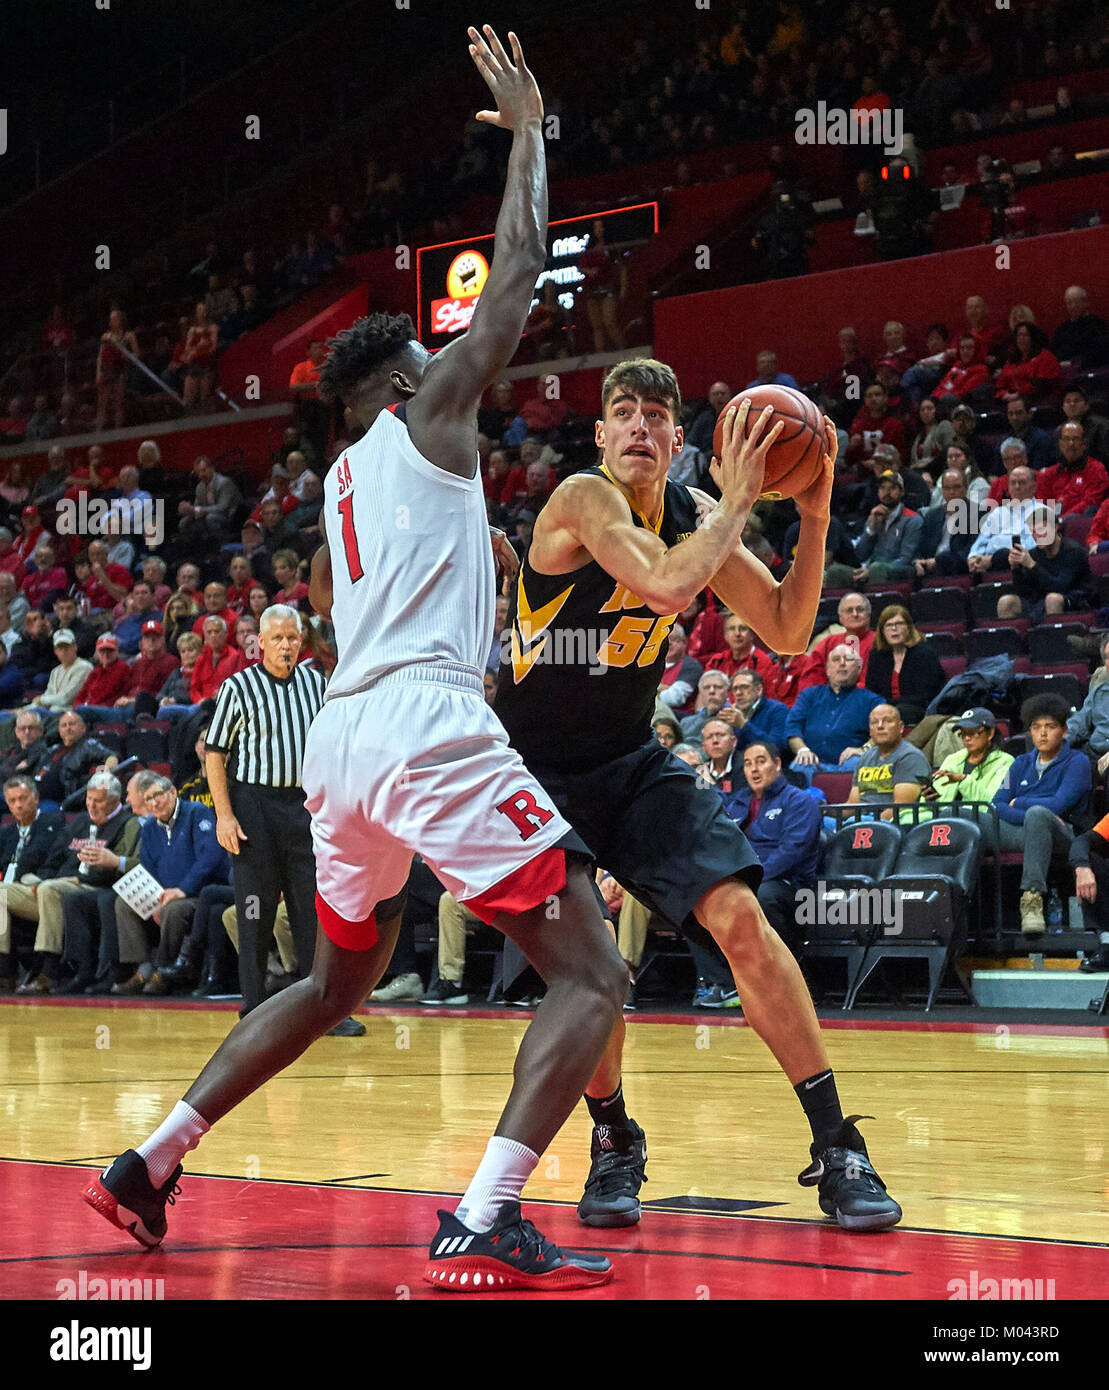 Piscataway, New Jersey, USA. 18th Jan, 2018. Iowa Hawkeyes forward Luka Garza (55) is defended by Rutgers Scarlet Knights forward Candido Sa (1) during the first half between the Iowa Hawkeyes and the Rutgers Scarlet Knights at Rutgers Athletic Center in Piscataway, New Jersey. Rutgers defeated Iowa 80-64. Duncan Williams/CSM/Alamy Live News Stock Photo